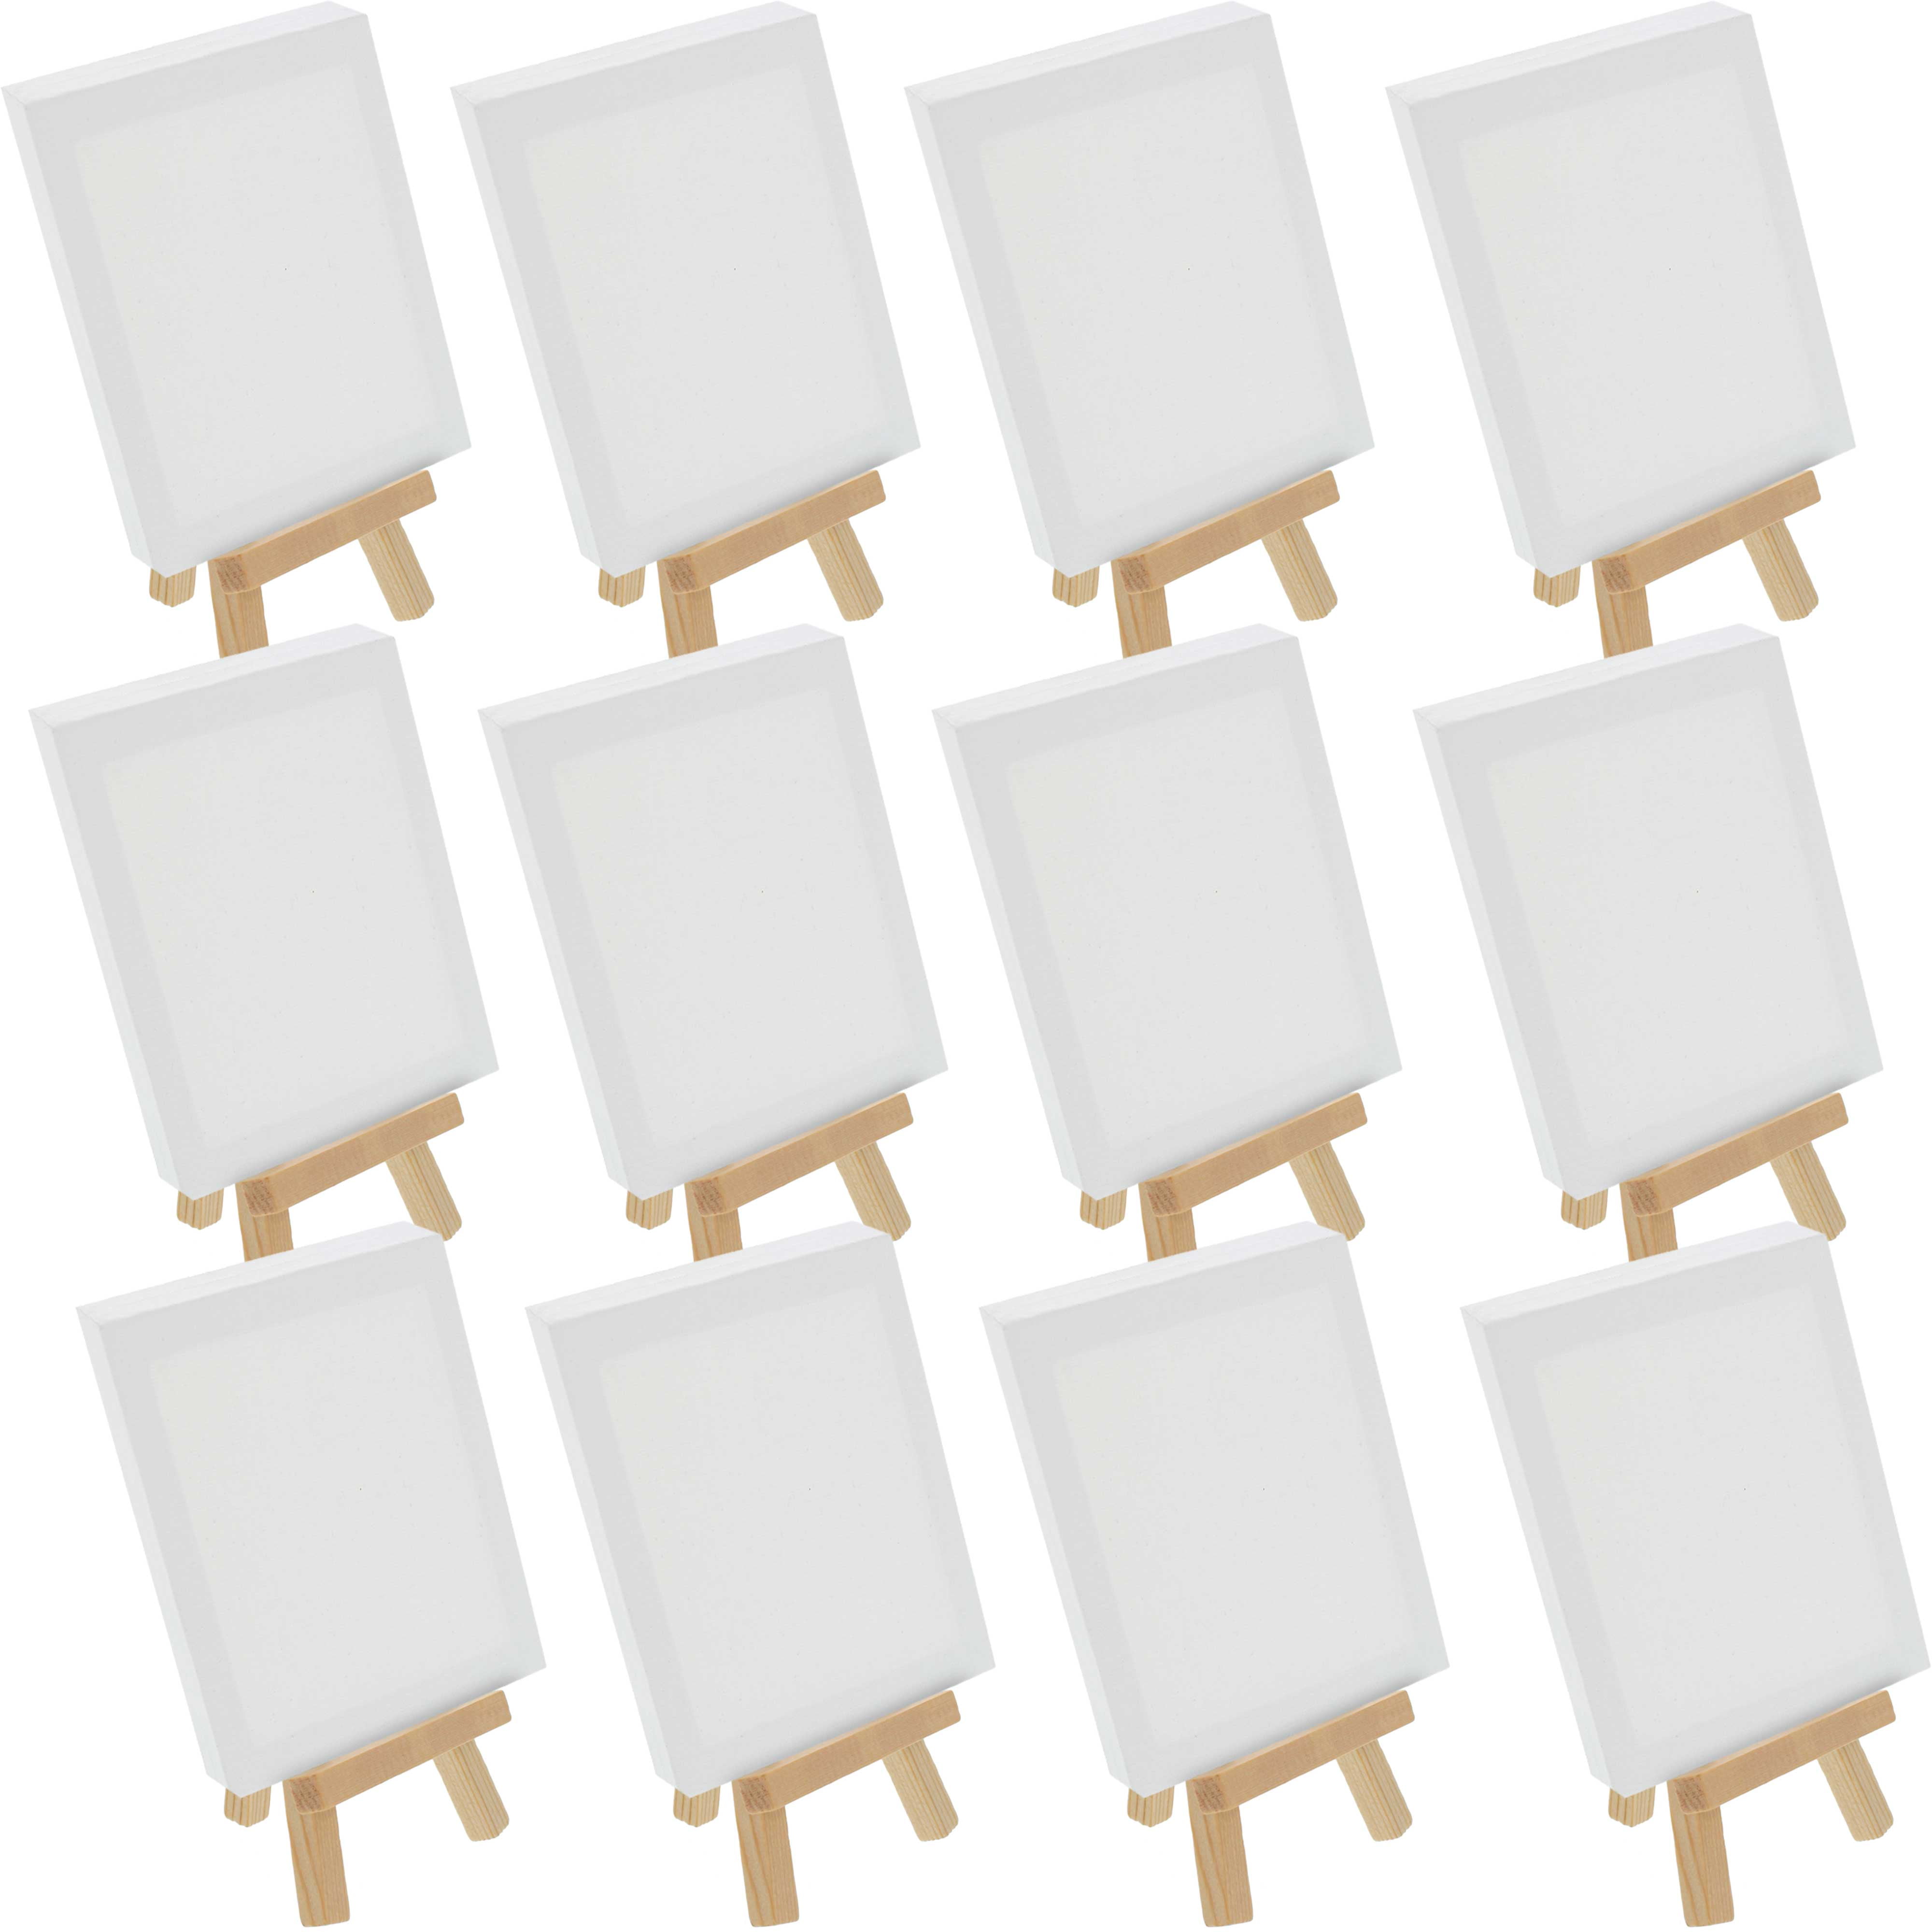  COHEALI 6 Sets Table Easel for Painting Mini Stretched Canvas  Sketching Board Mini Canvas and Easel Paint and Sip Ideas Art Canvases  Painting Kit Small Easel Wooden Air Travel Paint Rack 